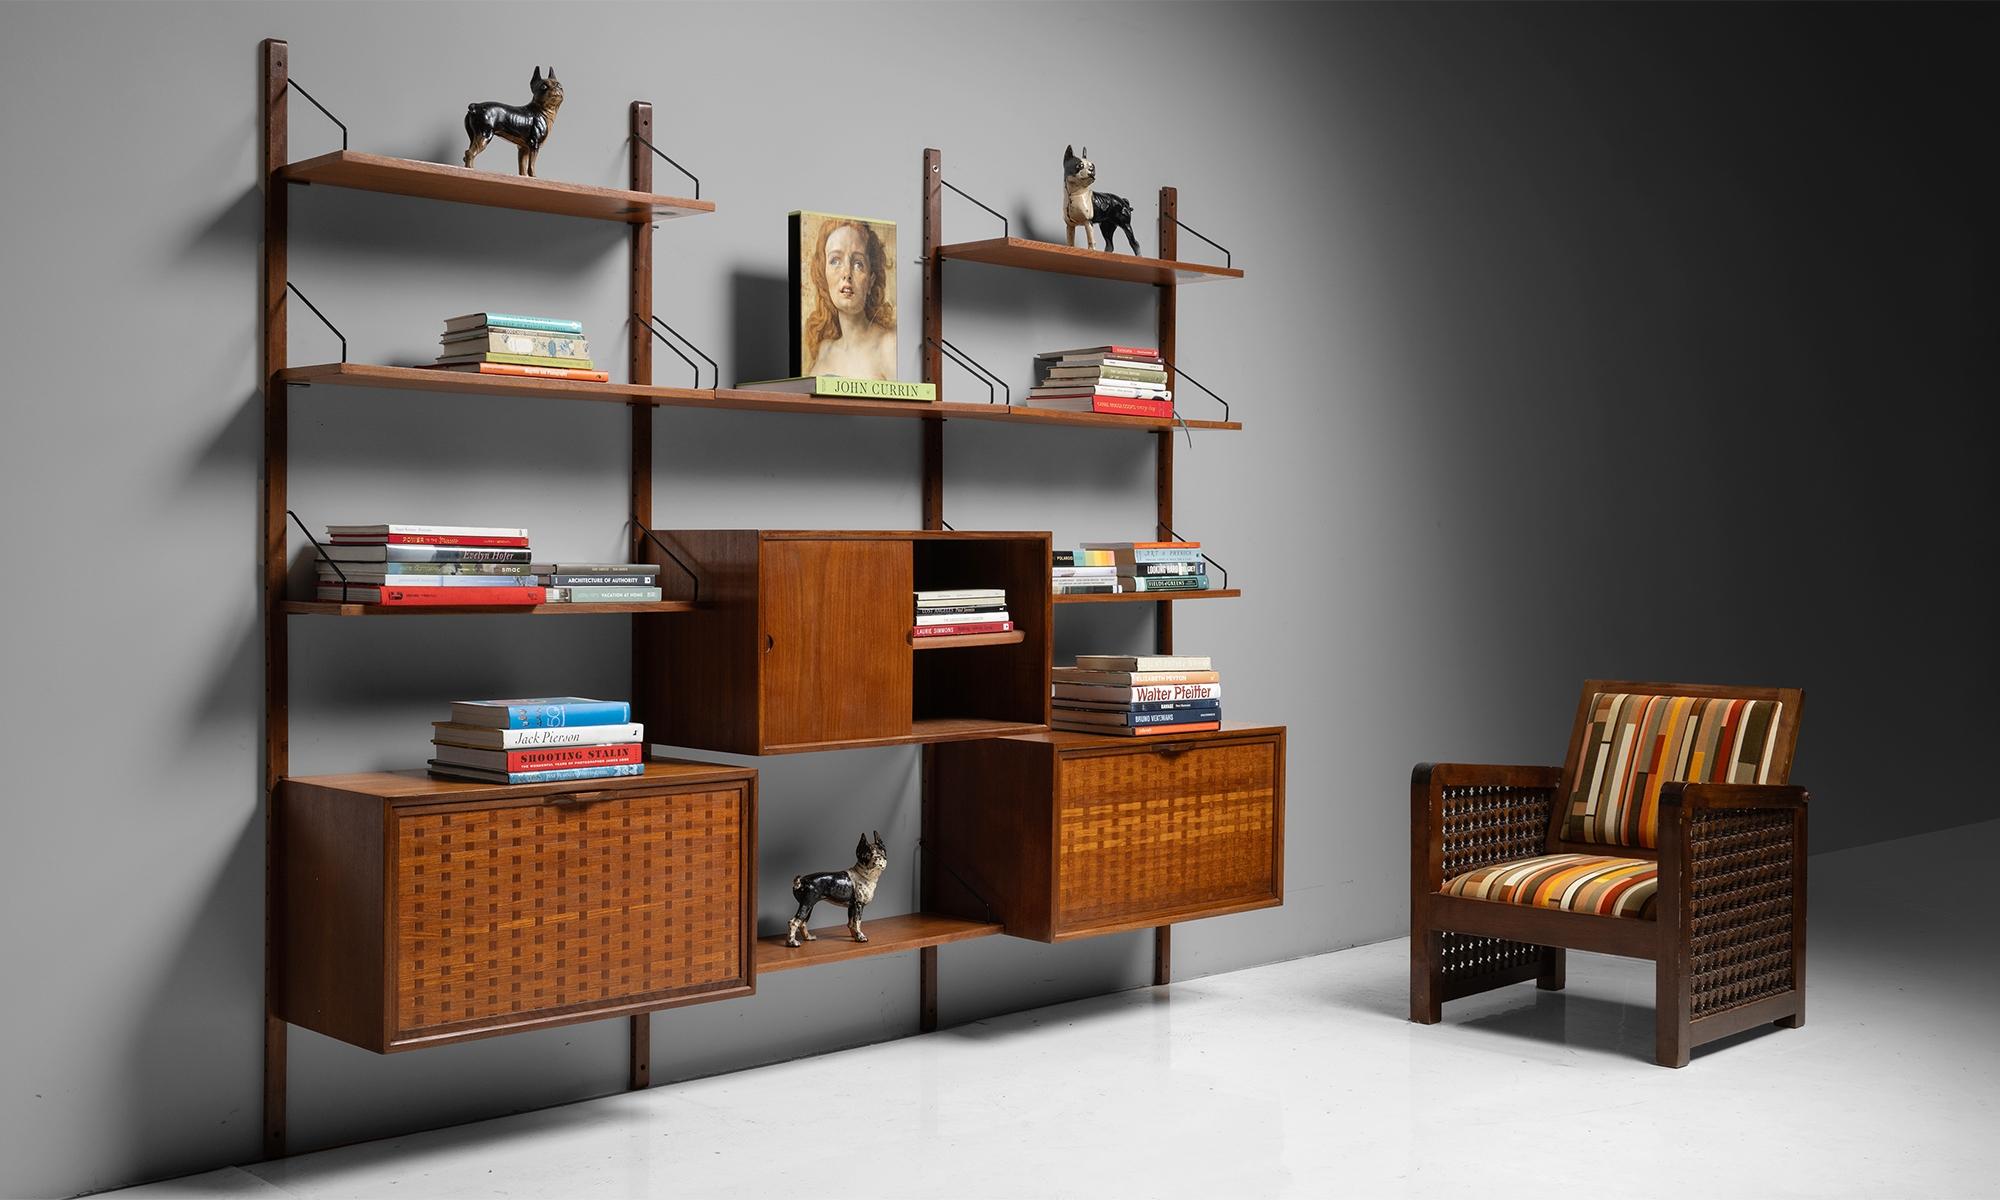 Modular Teak Wall Unit by Poul Cadovius

England circa 1950

Adjustable shelving and storage, constructed in teak with black metal brackets.

96”L x 15.25”d x 77.75”h